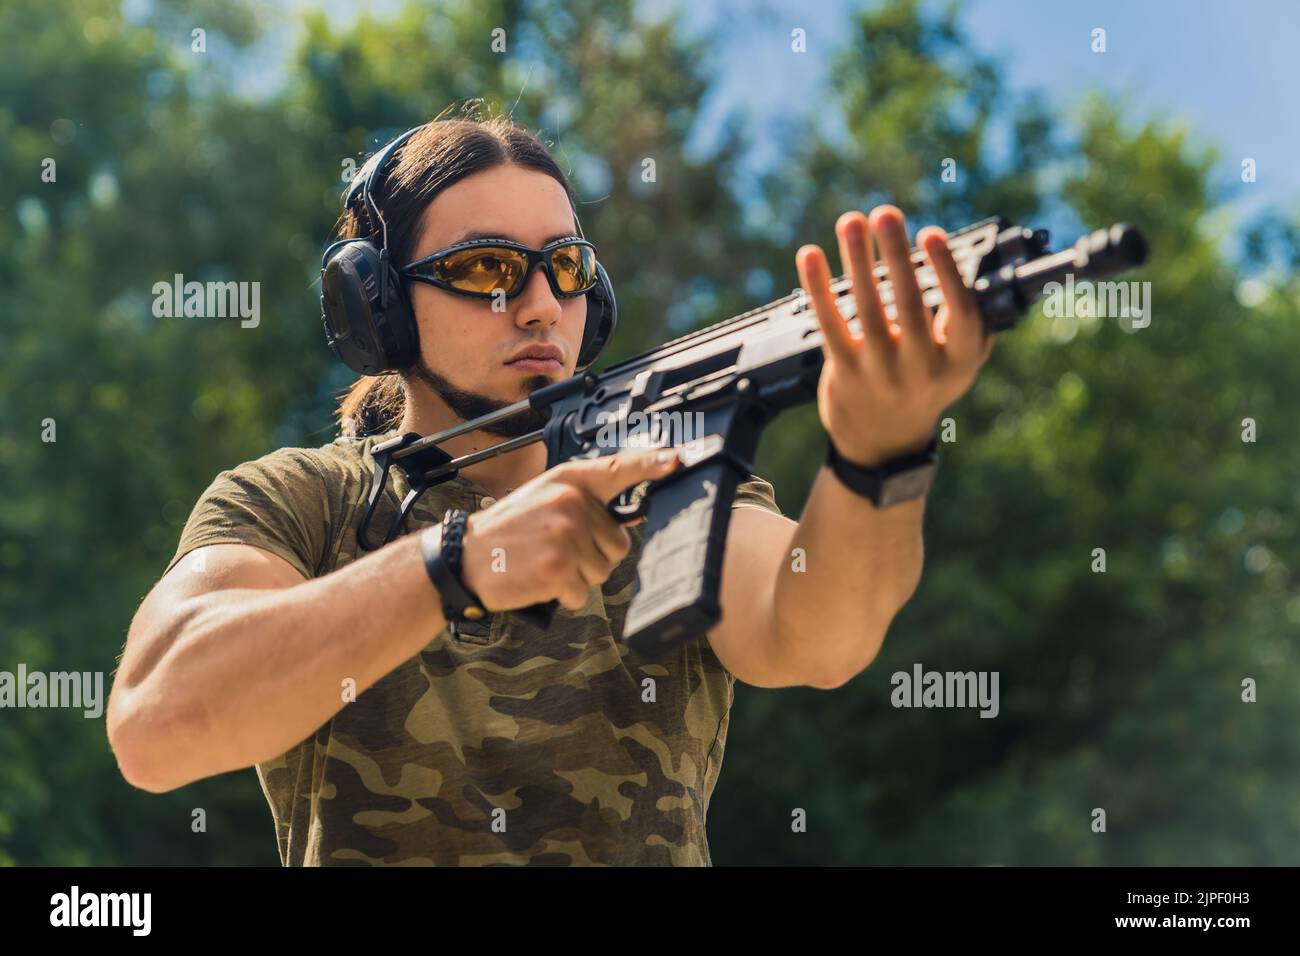 Bearded man in safety goggles headphones and camo t-shirt practicing using submachine gun. Outdoor firing range. Horizontal shot. High quality photo Stock Photo